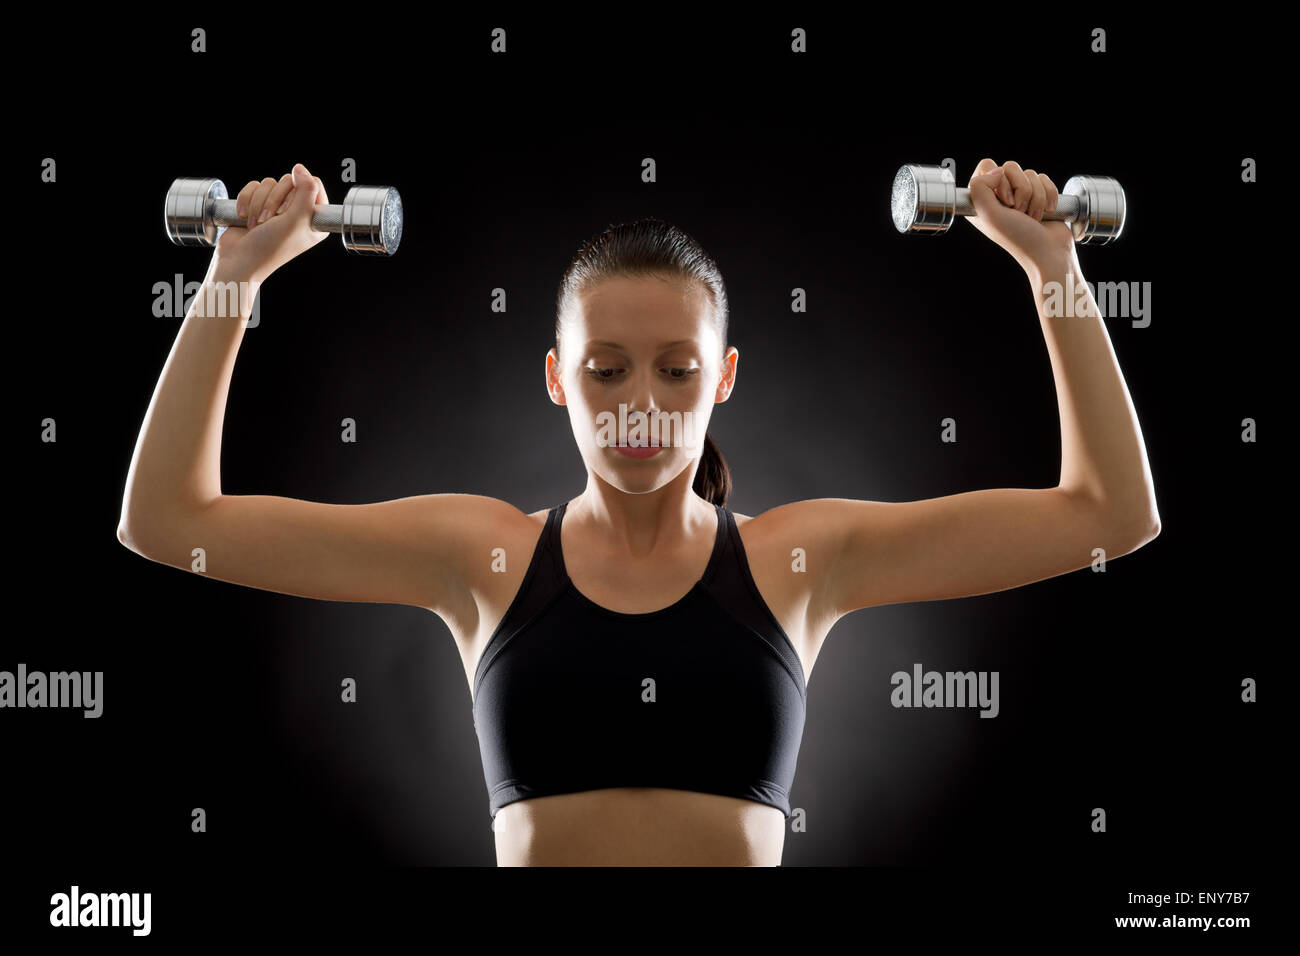 Black fitness woman young sport weights exercise Stock Photo